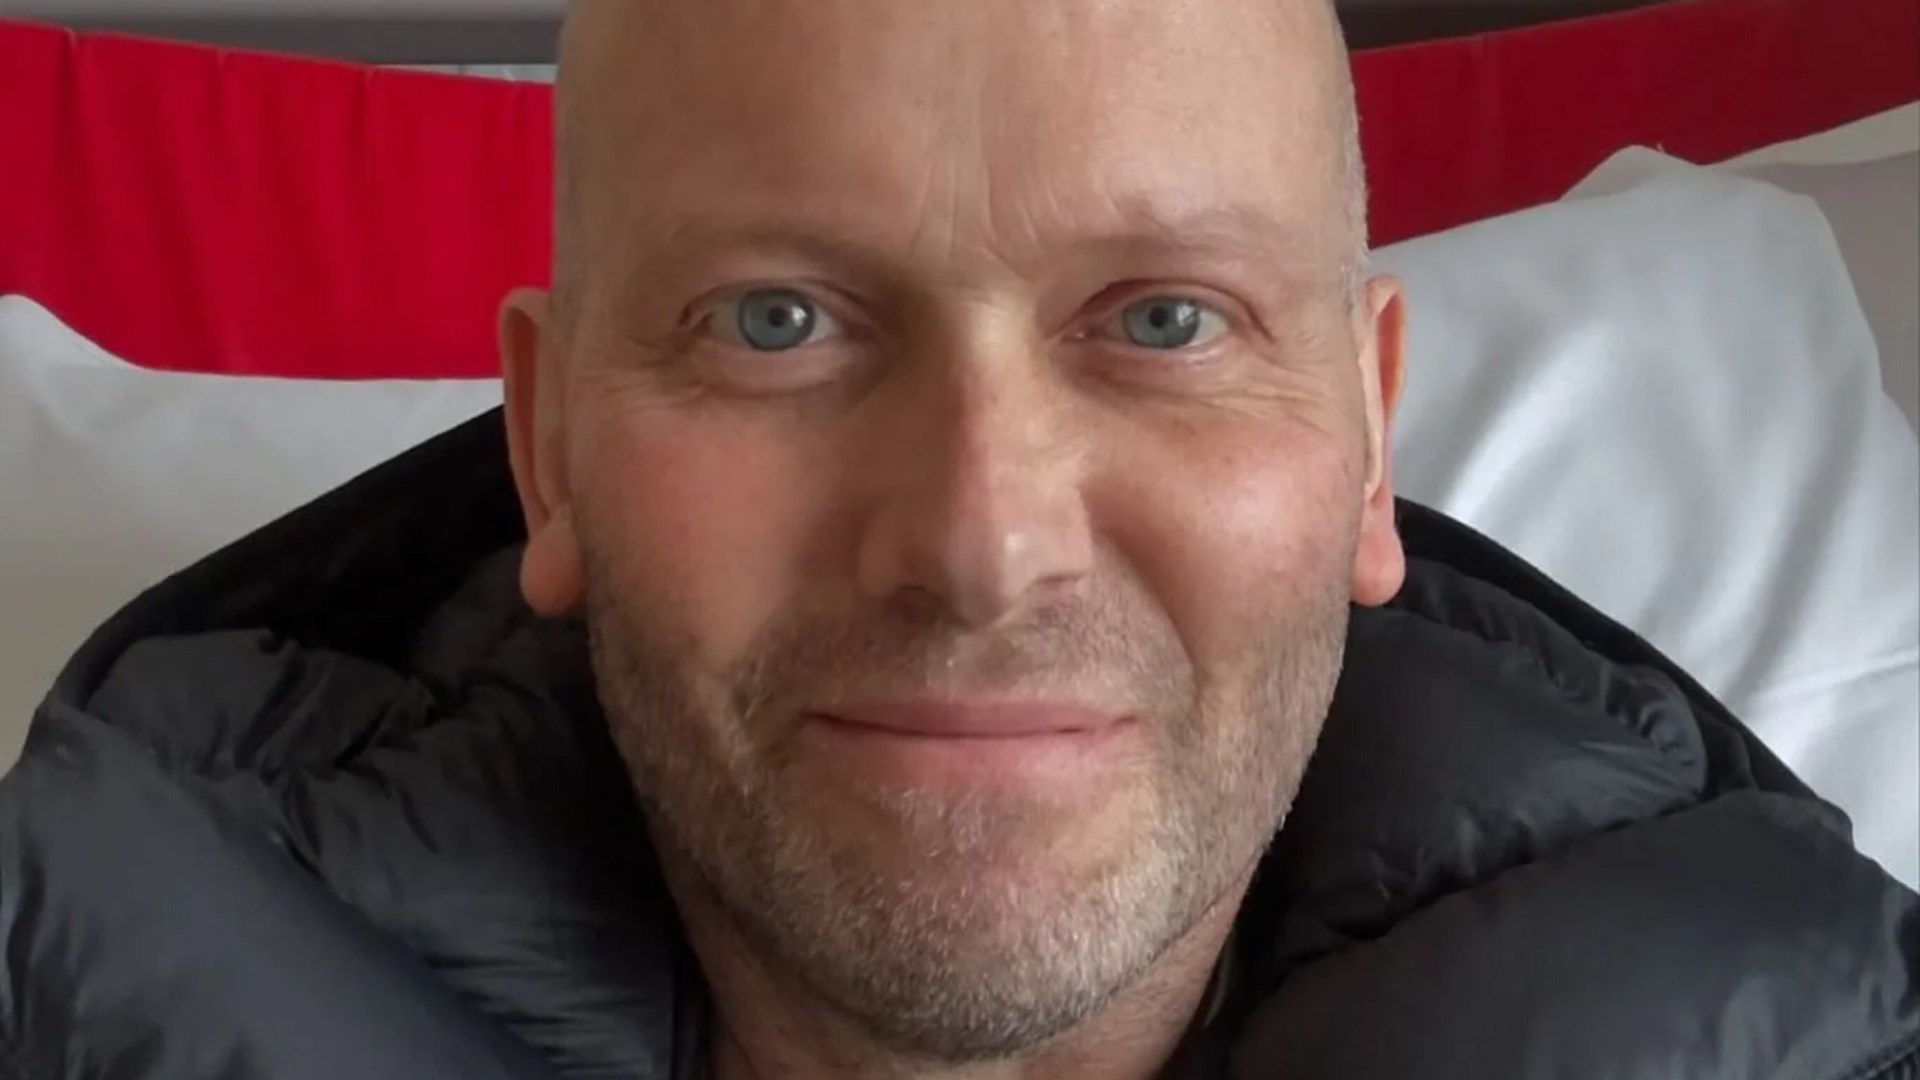 Dario G star vowed to beat illness in optimistic final post just three weeks before his tragic death aged 53 [Video]